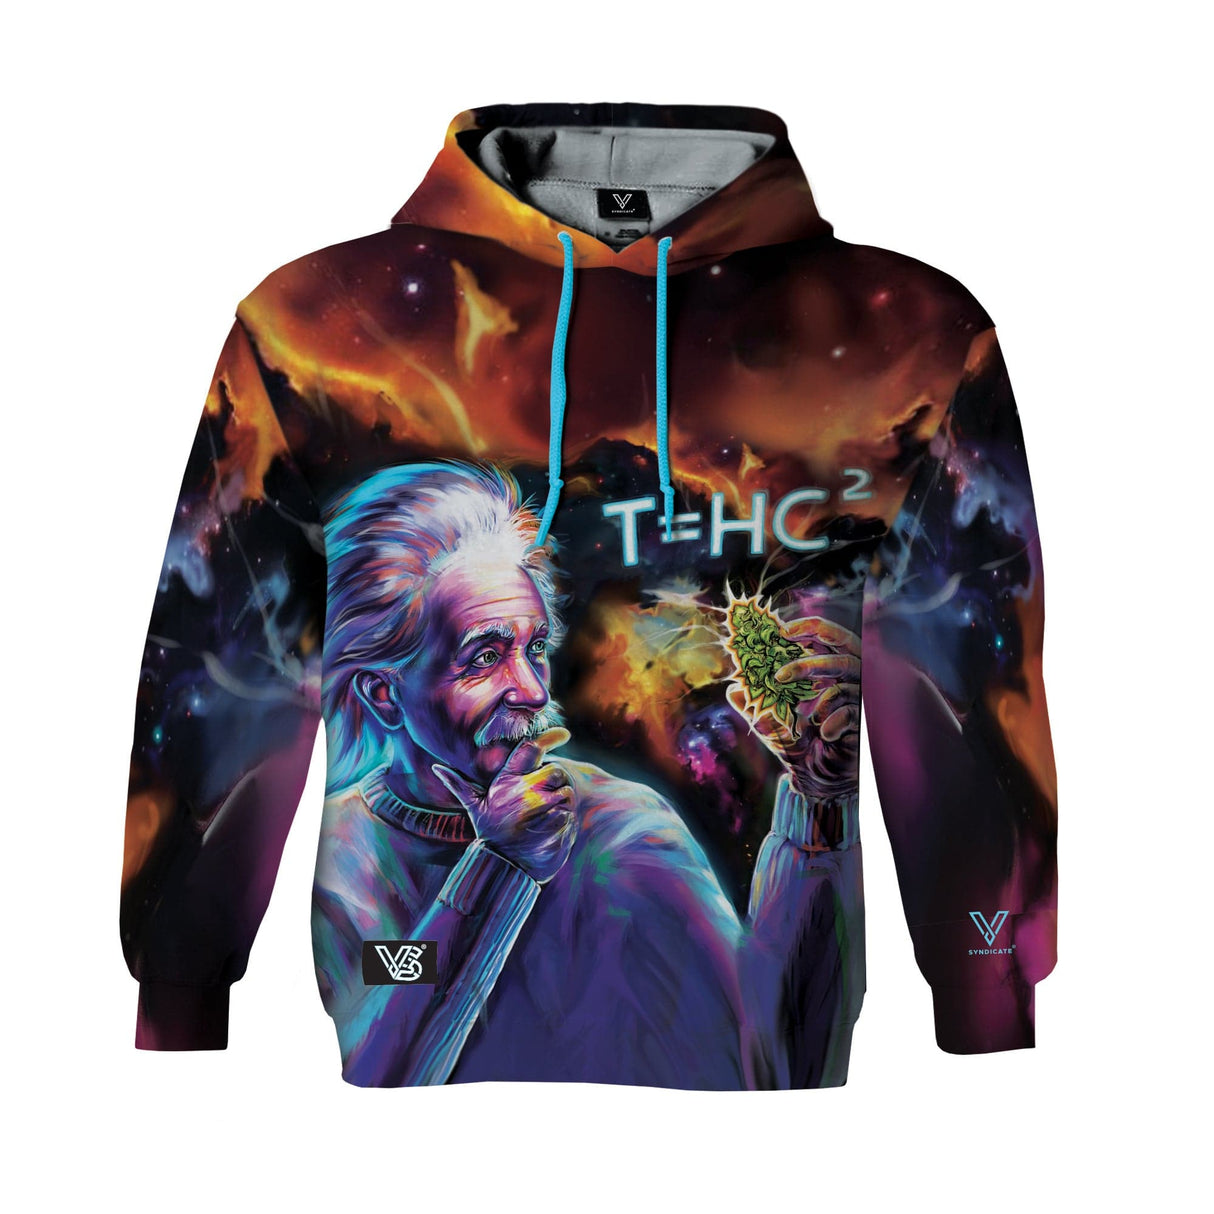 V Syndicate T=HC2 Einstein Black Hole Hoodie with vibrant 360° print, available in sizes S to XXL